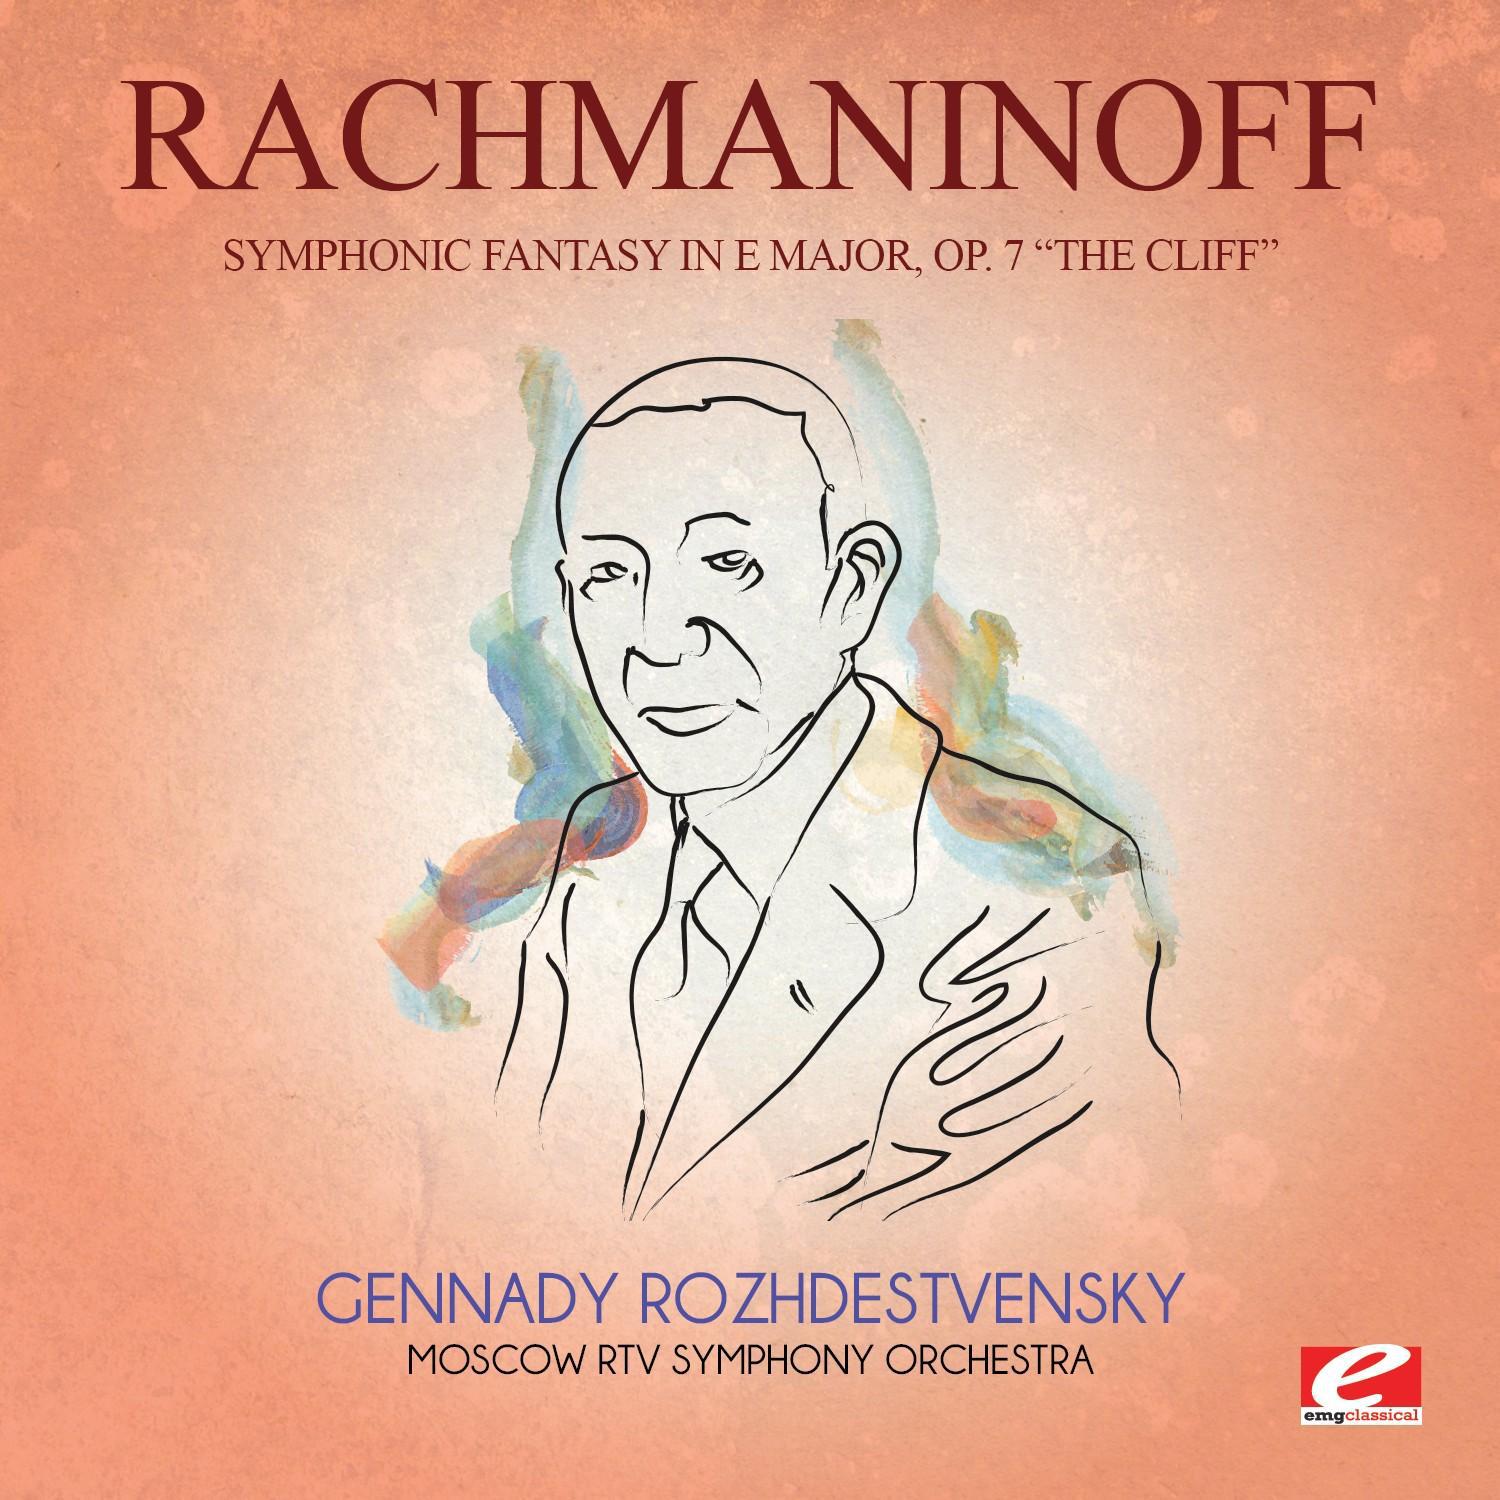 Symphonic Fantasy in E Major, Op. 7 "The Cliff"